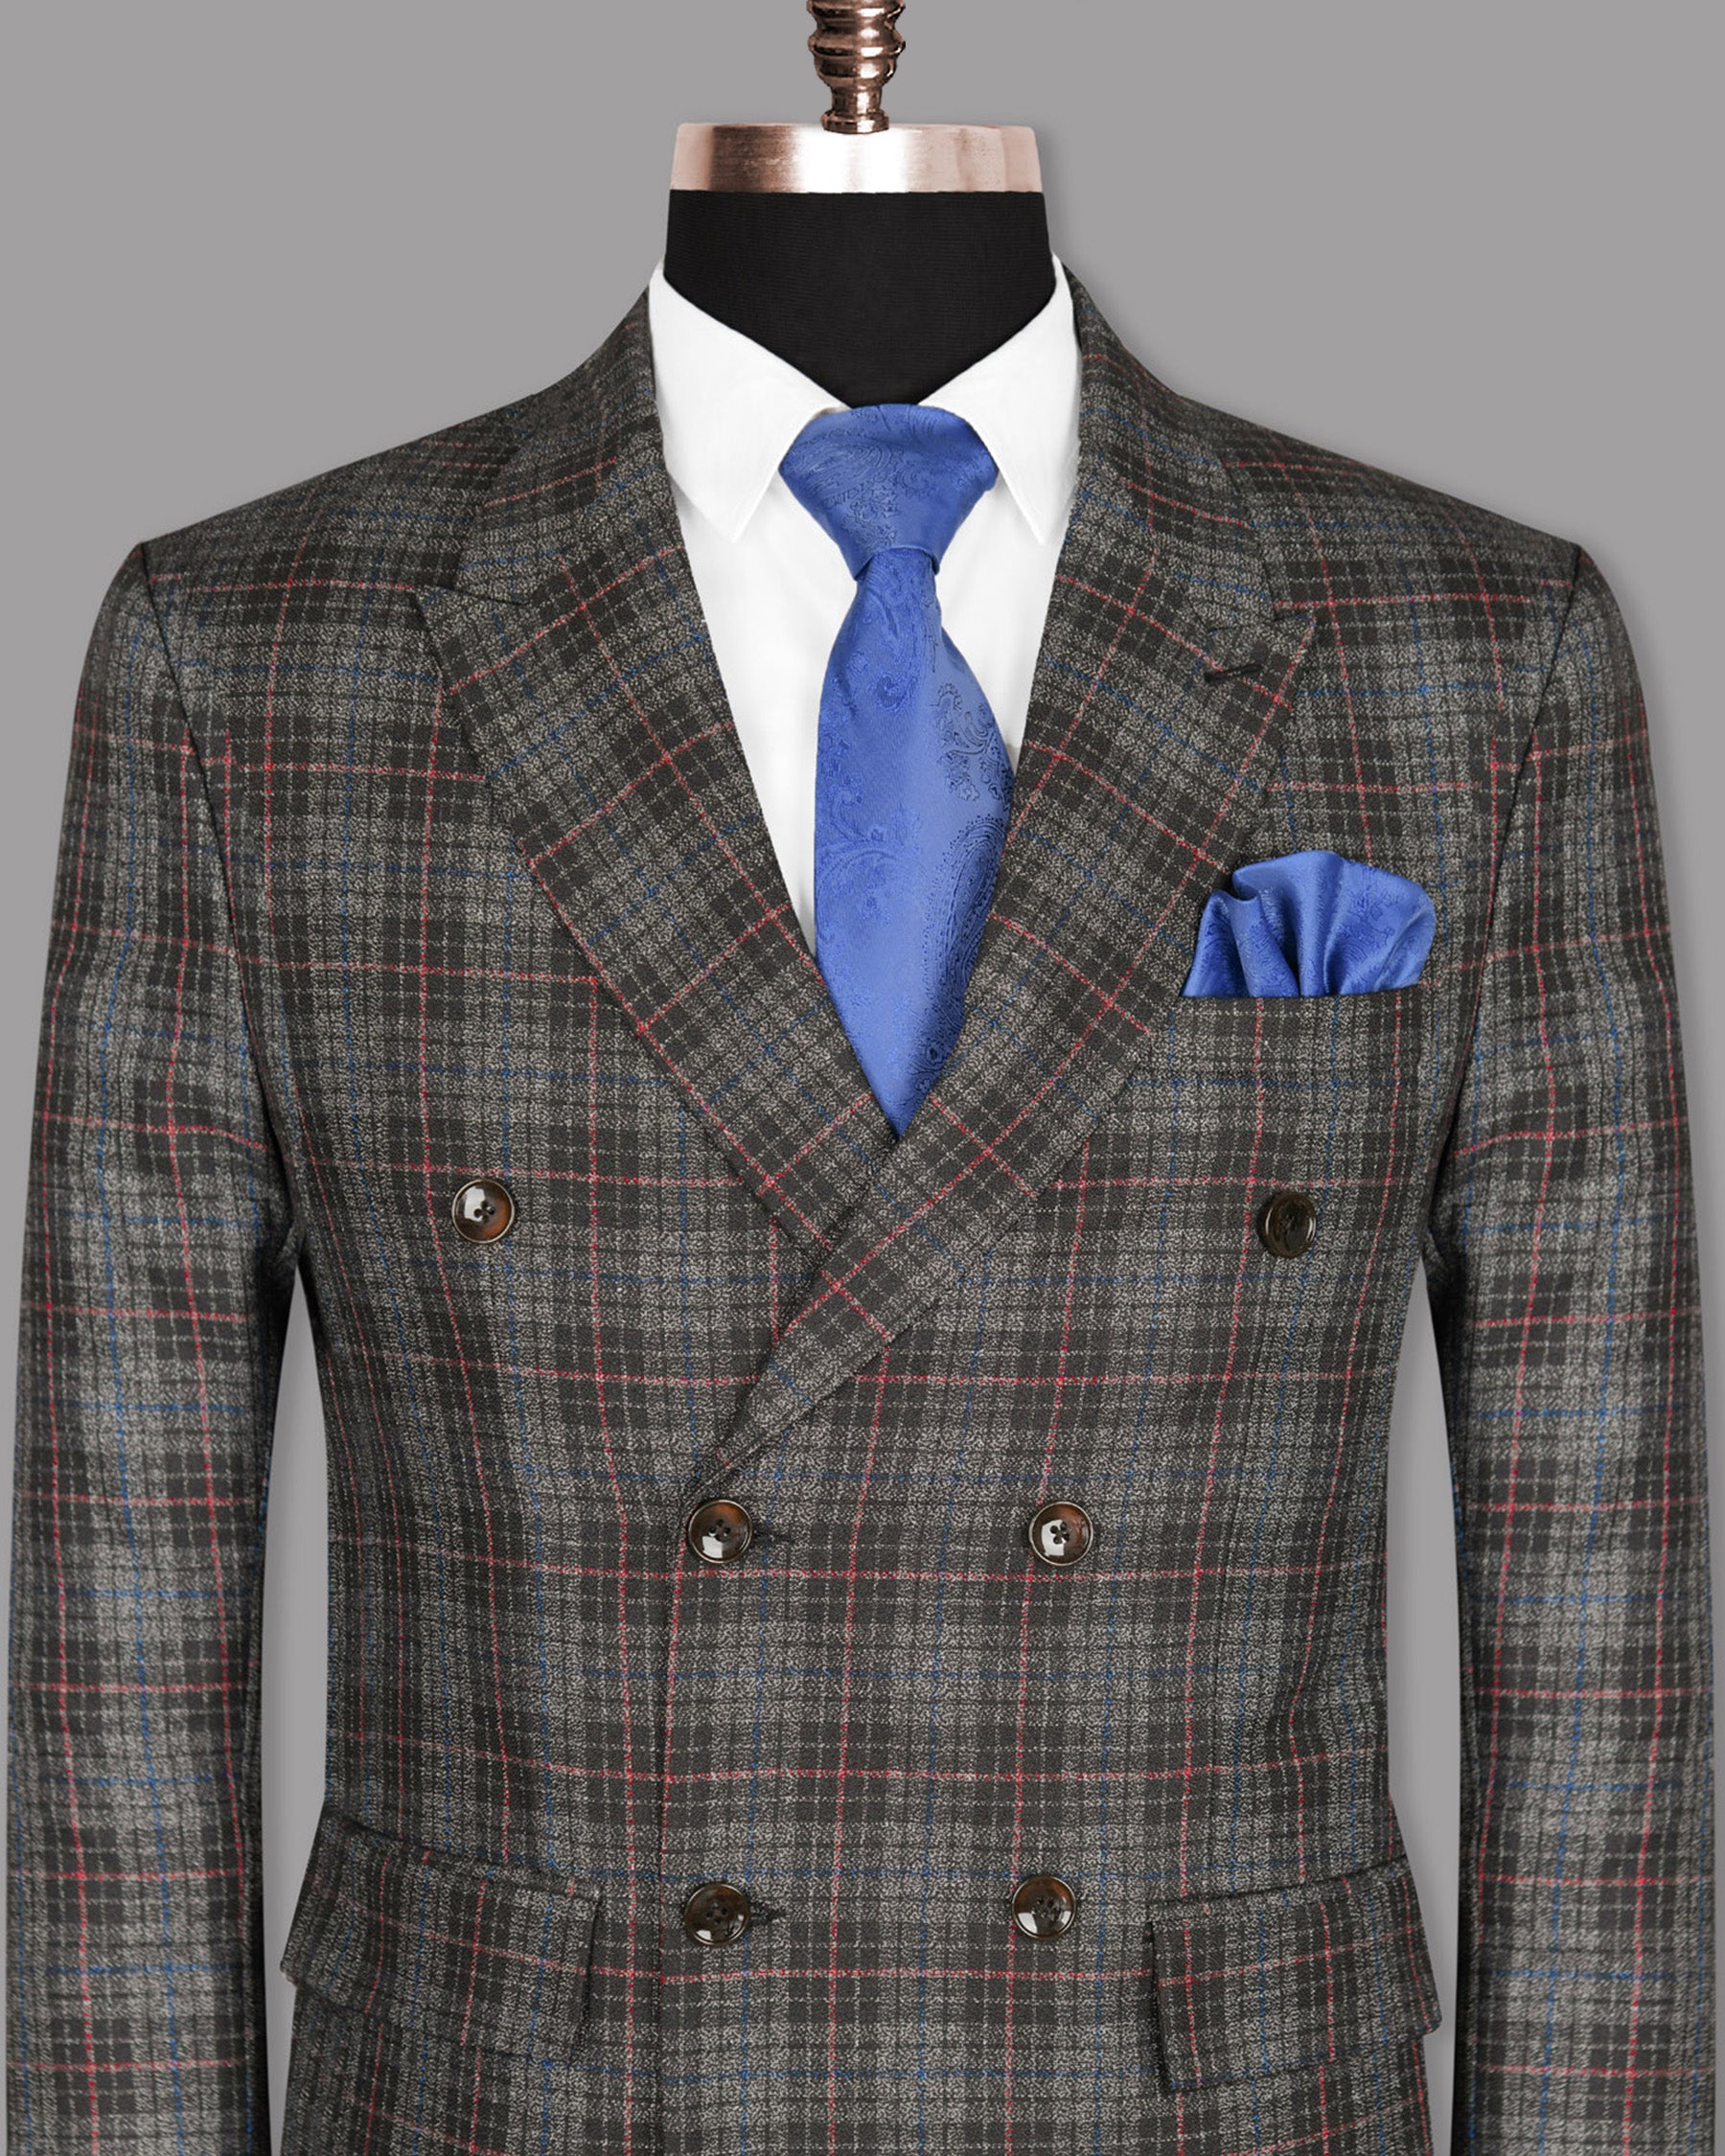 Charcoal Windowpane Wool Rich Double Breasted Blazer BL922-DB-60, BL922-DB-50, BL922-DB-38, BL922-DB-36, BL922-DB-48, BL922-DB-52, BL922-DB-54, BL922-DB-46, BL922-DB-58, BL922-DB-42, BL922-DB-44, BL922-DB-40, BL922-DB-56